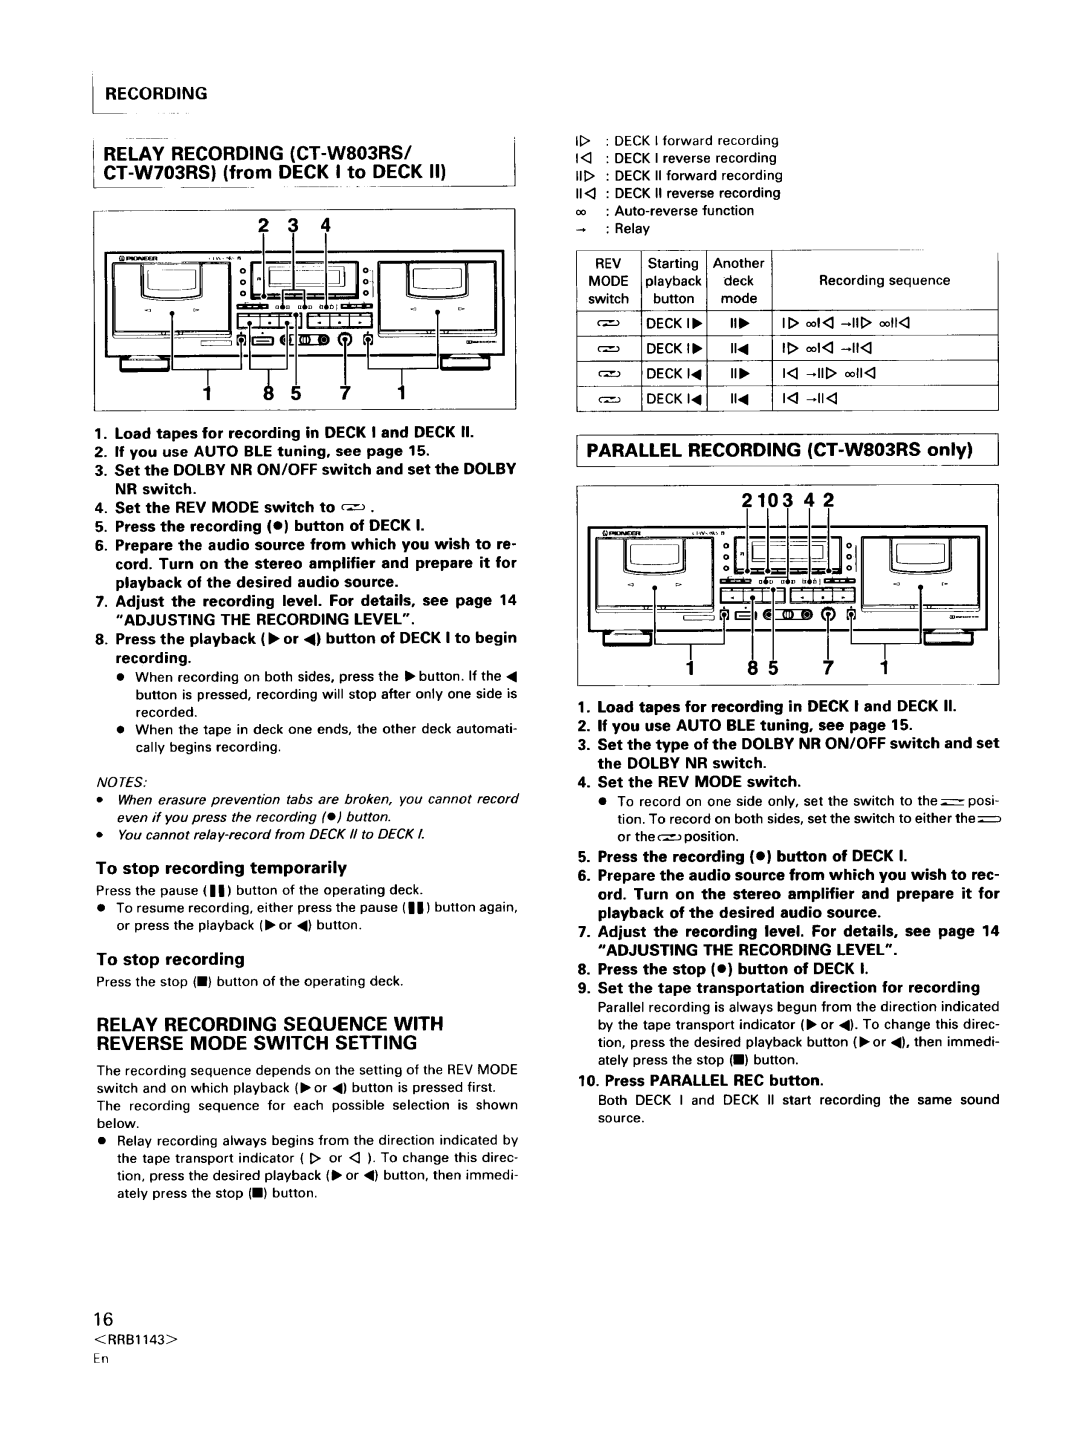 Pioneer CT-W603RS operating instructions iRECORDING, PARALLEL RECORDING CT-W803RSonly J, DECK lb, c--,J 